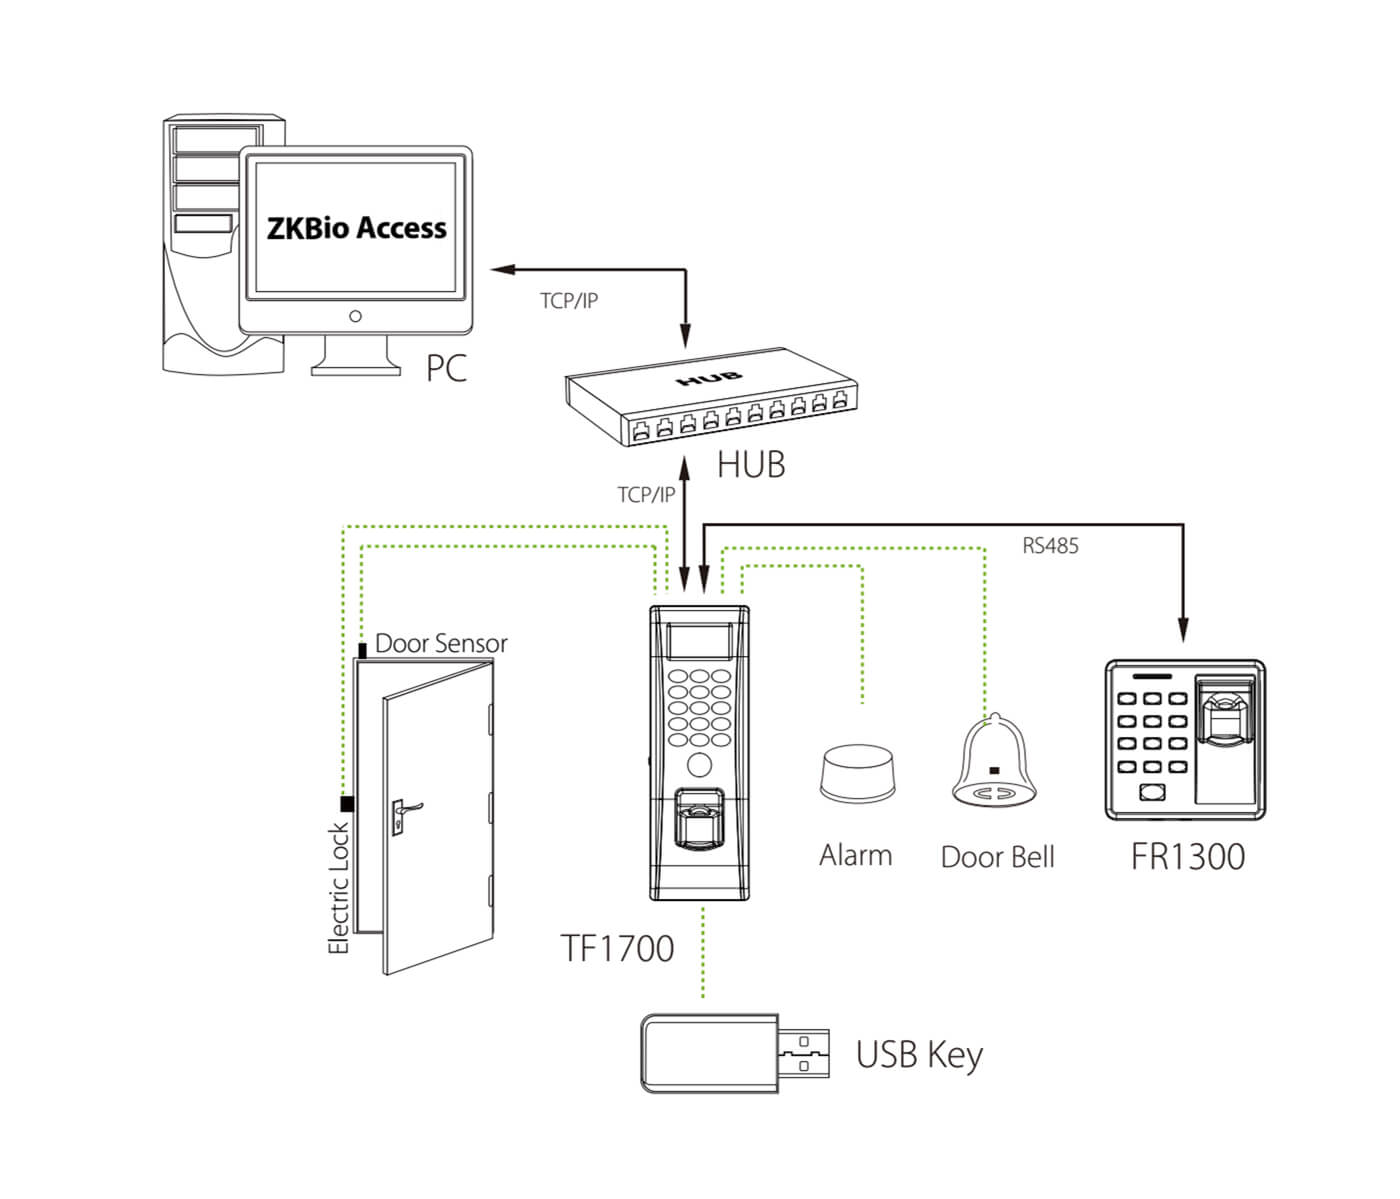 FR1300 Connecting to FP Access Control